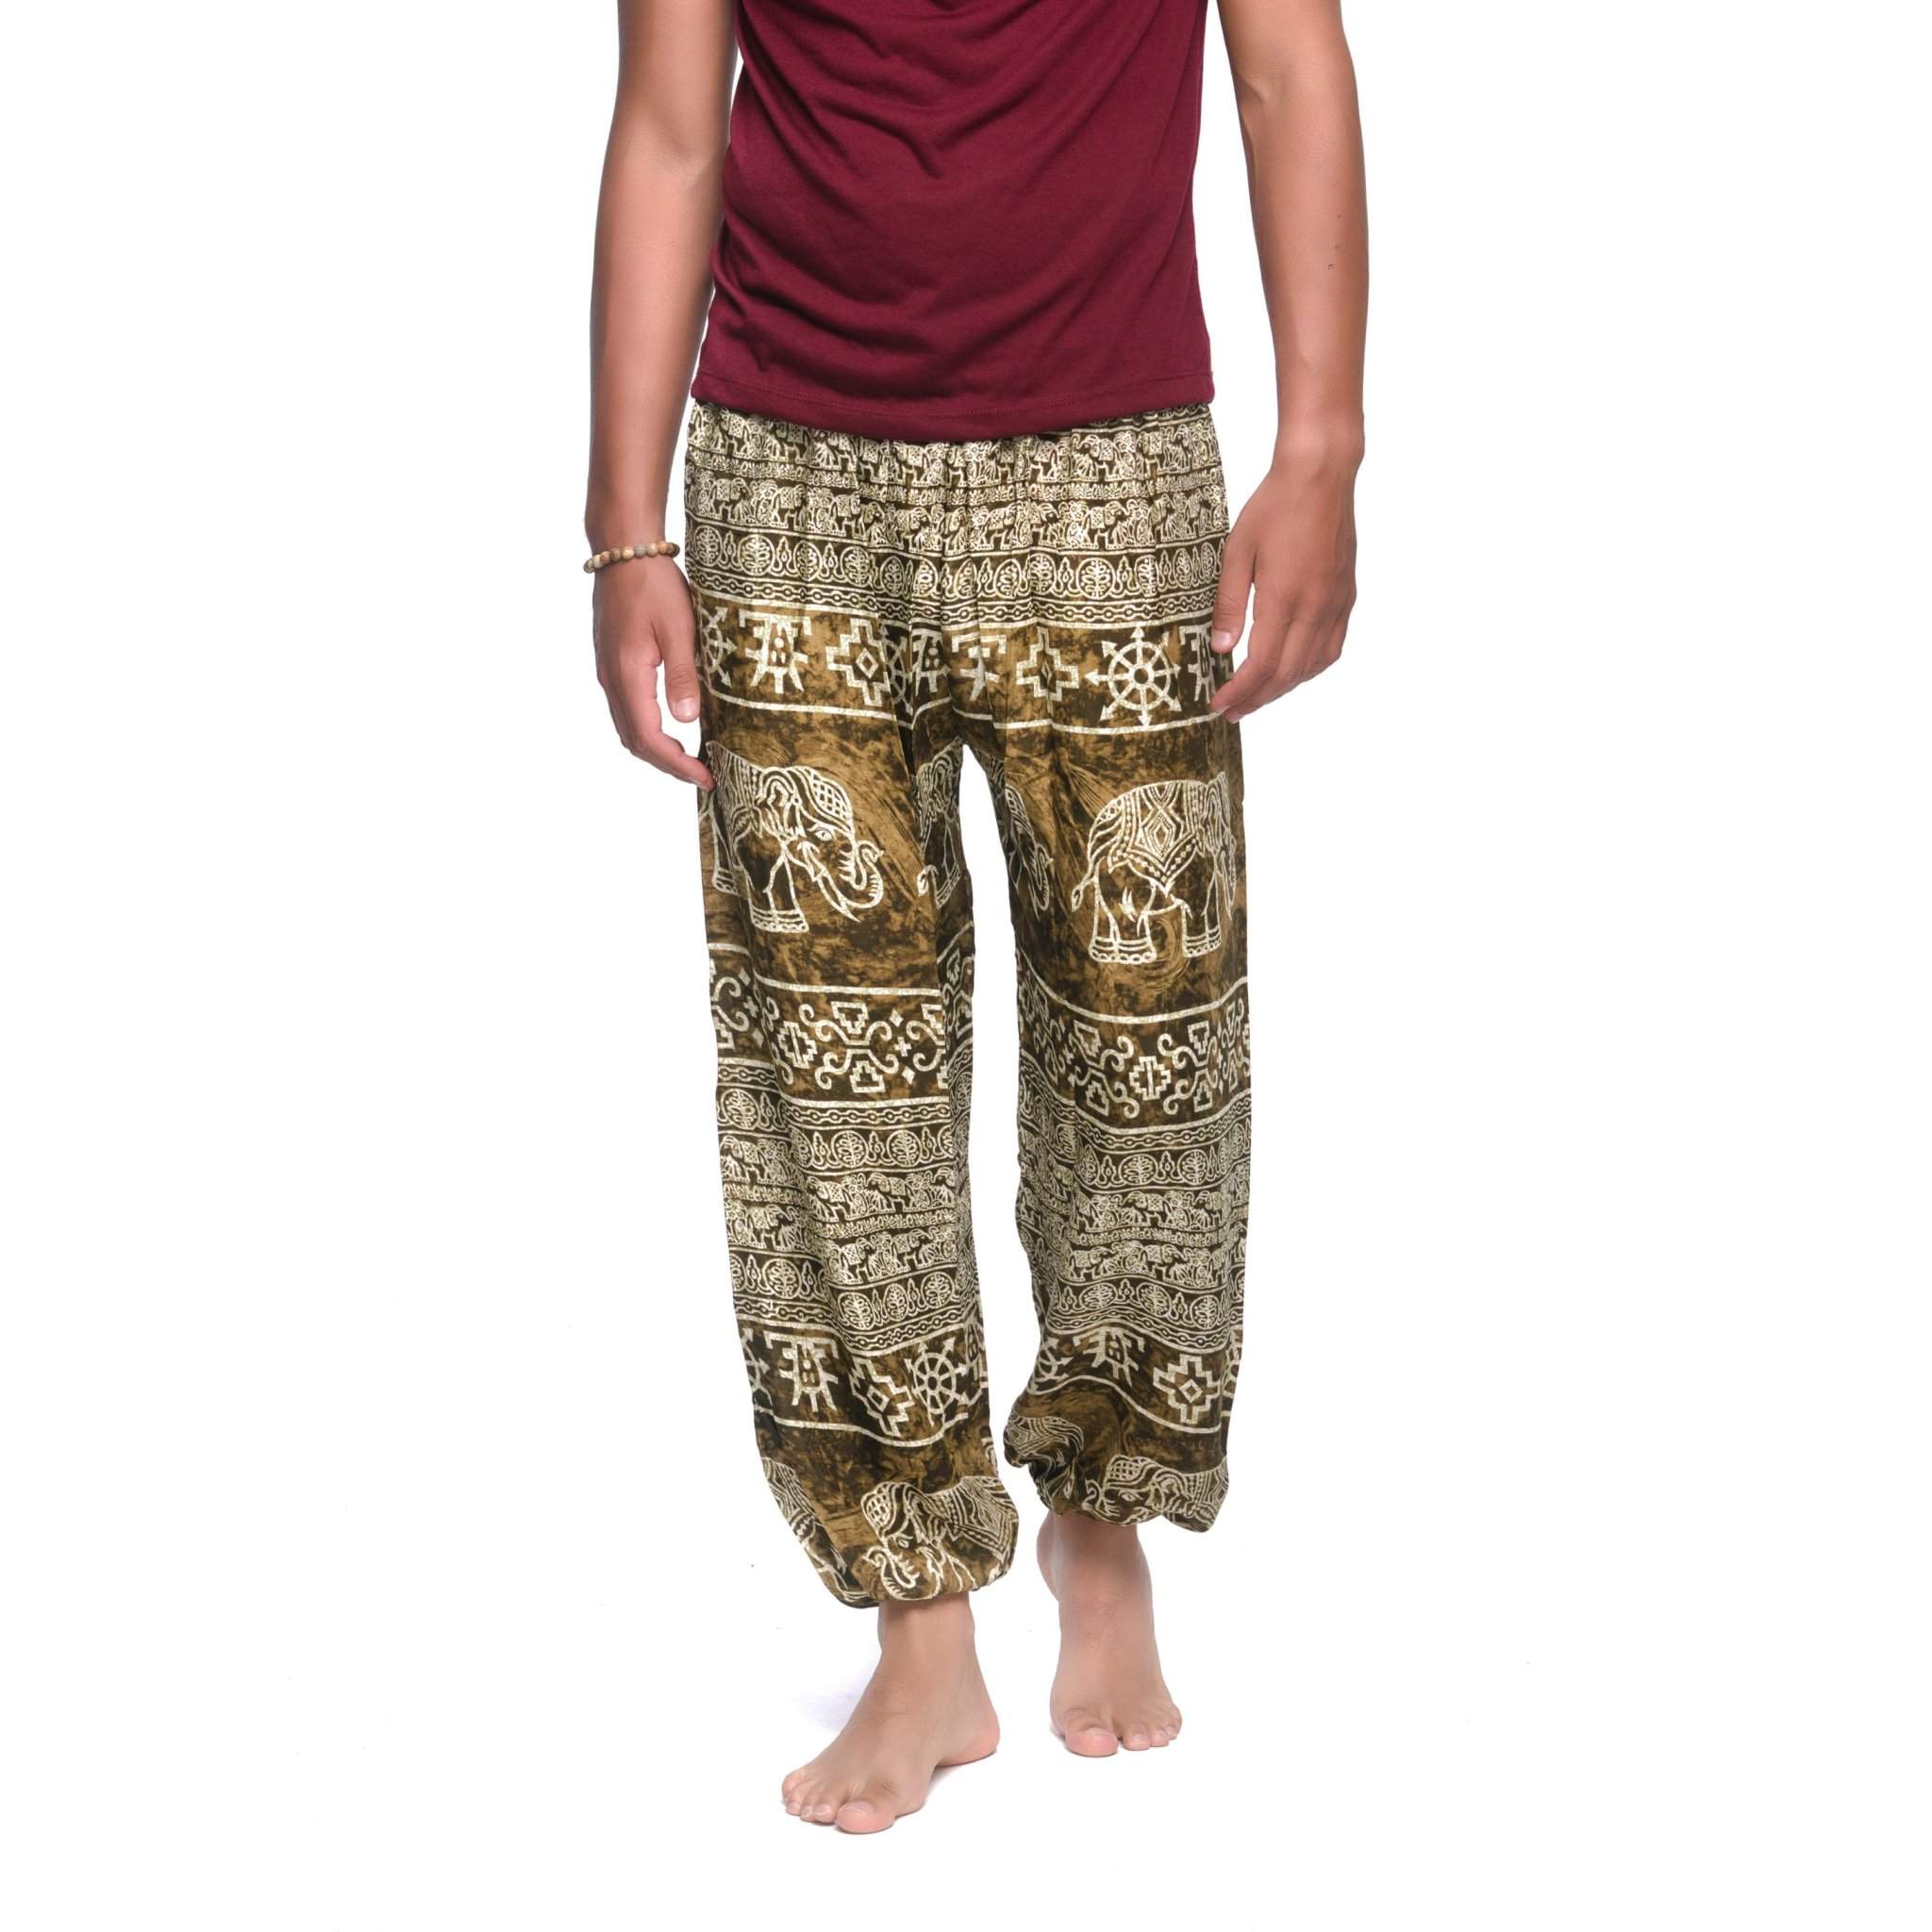 COLOMBO PANTS - Drawstring Elepanta Drawstring Pants - Buy Today Elephant Pants Jewelry And Bohemian Clothes Handmade In Thailand Help To Save The Elephants FairTrade And Vegan